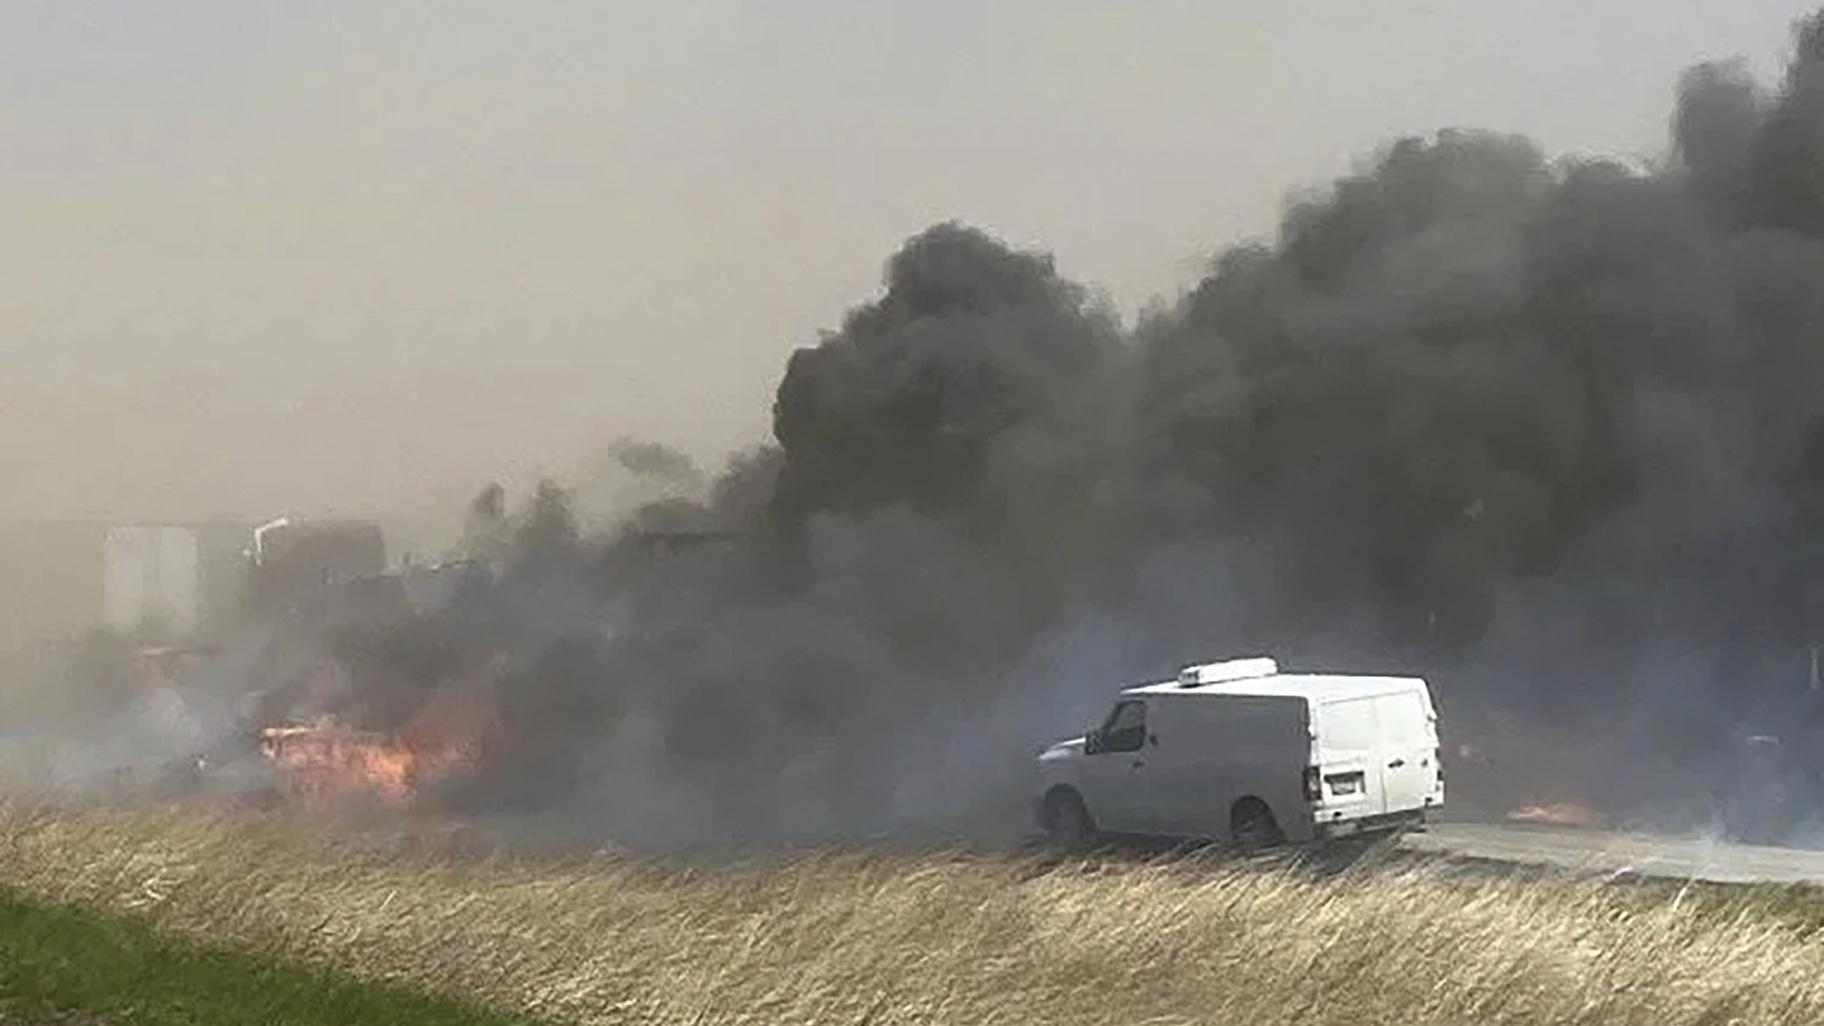 Smoke billows after a crash involving at least 20 vehicles shut down a highway in Illinois, Monday, May 1, 2023. Illinois State Police say a windstorm that kicked up clouds of dust in south-central Illinois led to numerous crashes and multiple fatalities on Interstate 55. (WICS TV via AP)